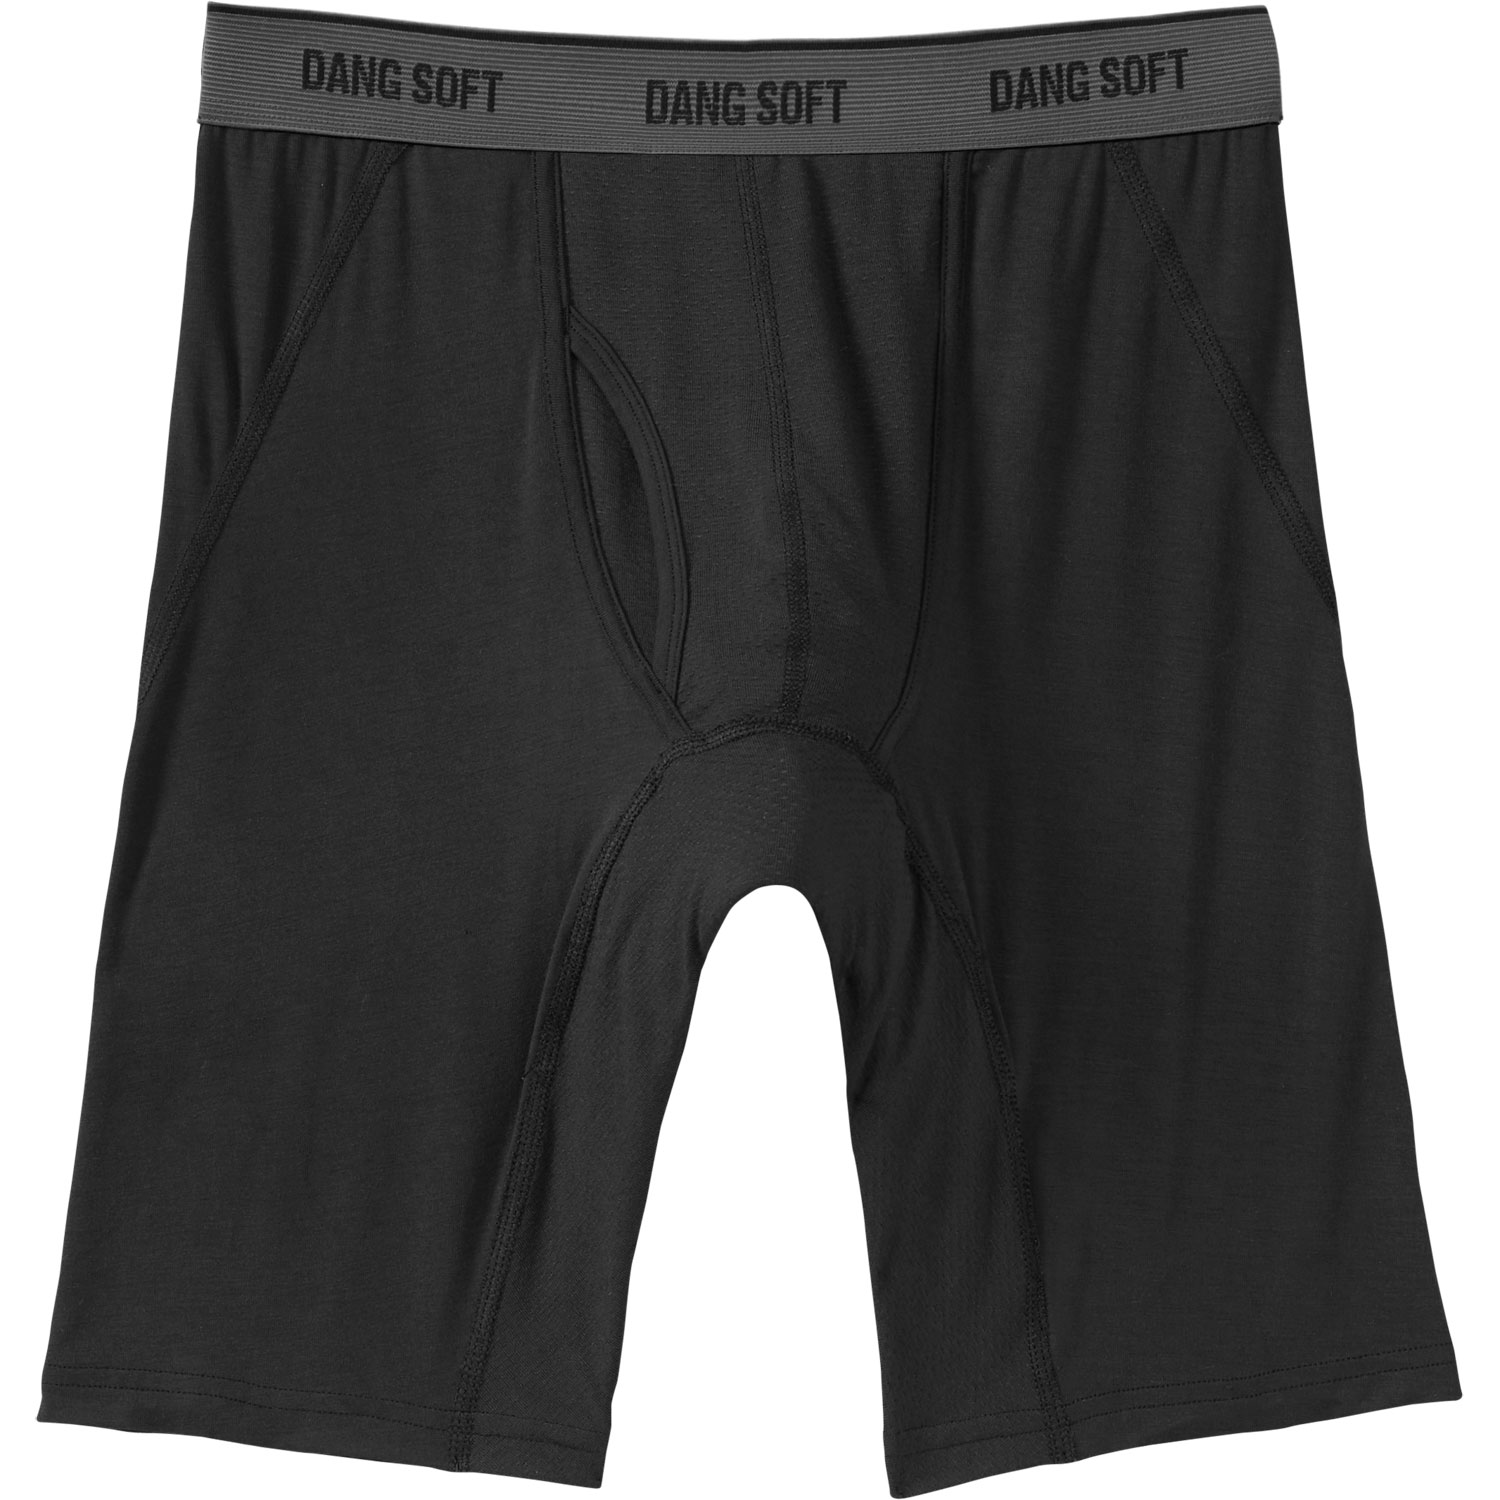 BEST BOXER BRIEFS Under Ware Duluth Trading Dang Soft Boxers I LOVE THEM  LOT OF AIRFLOW 